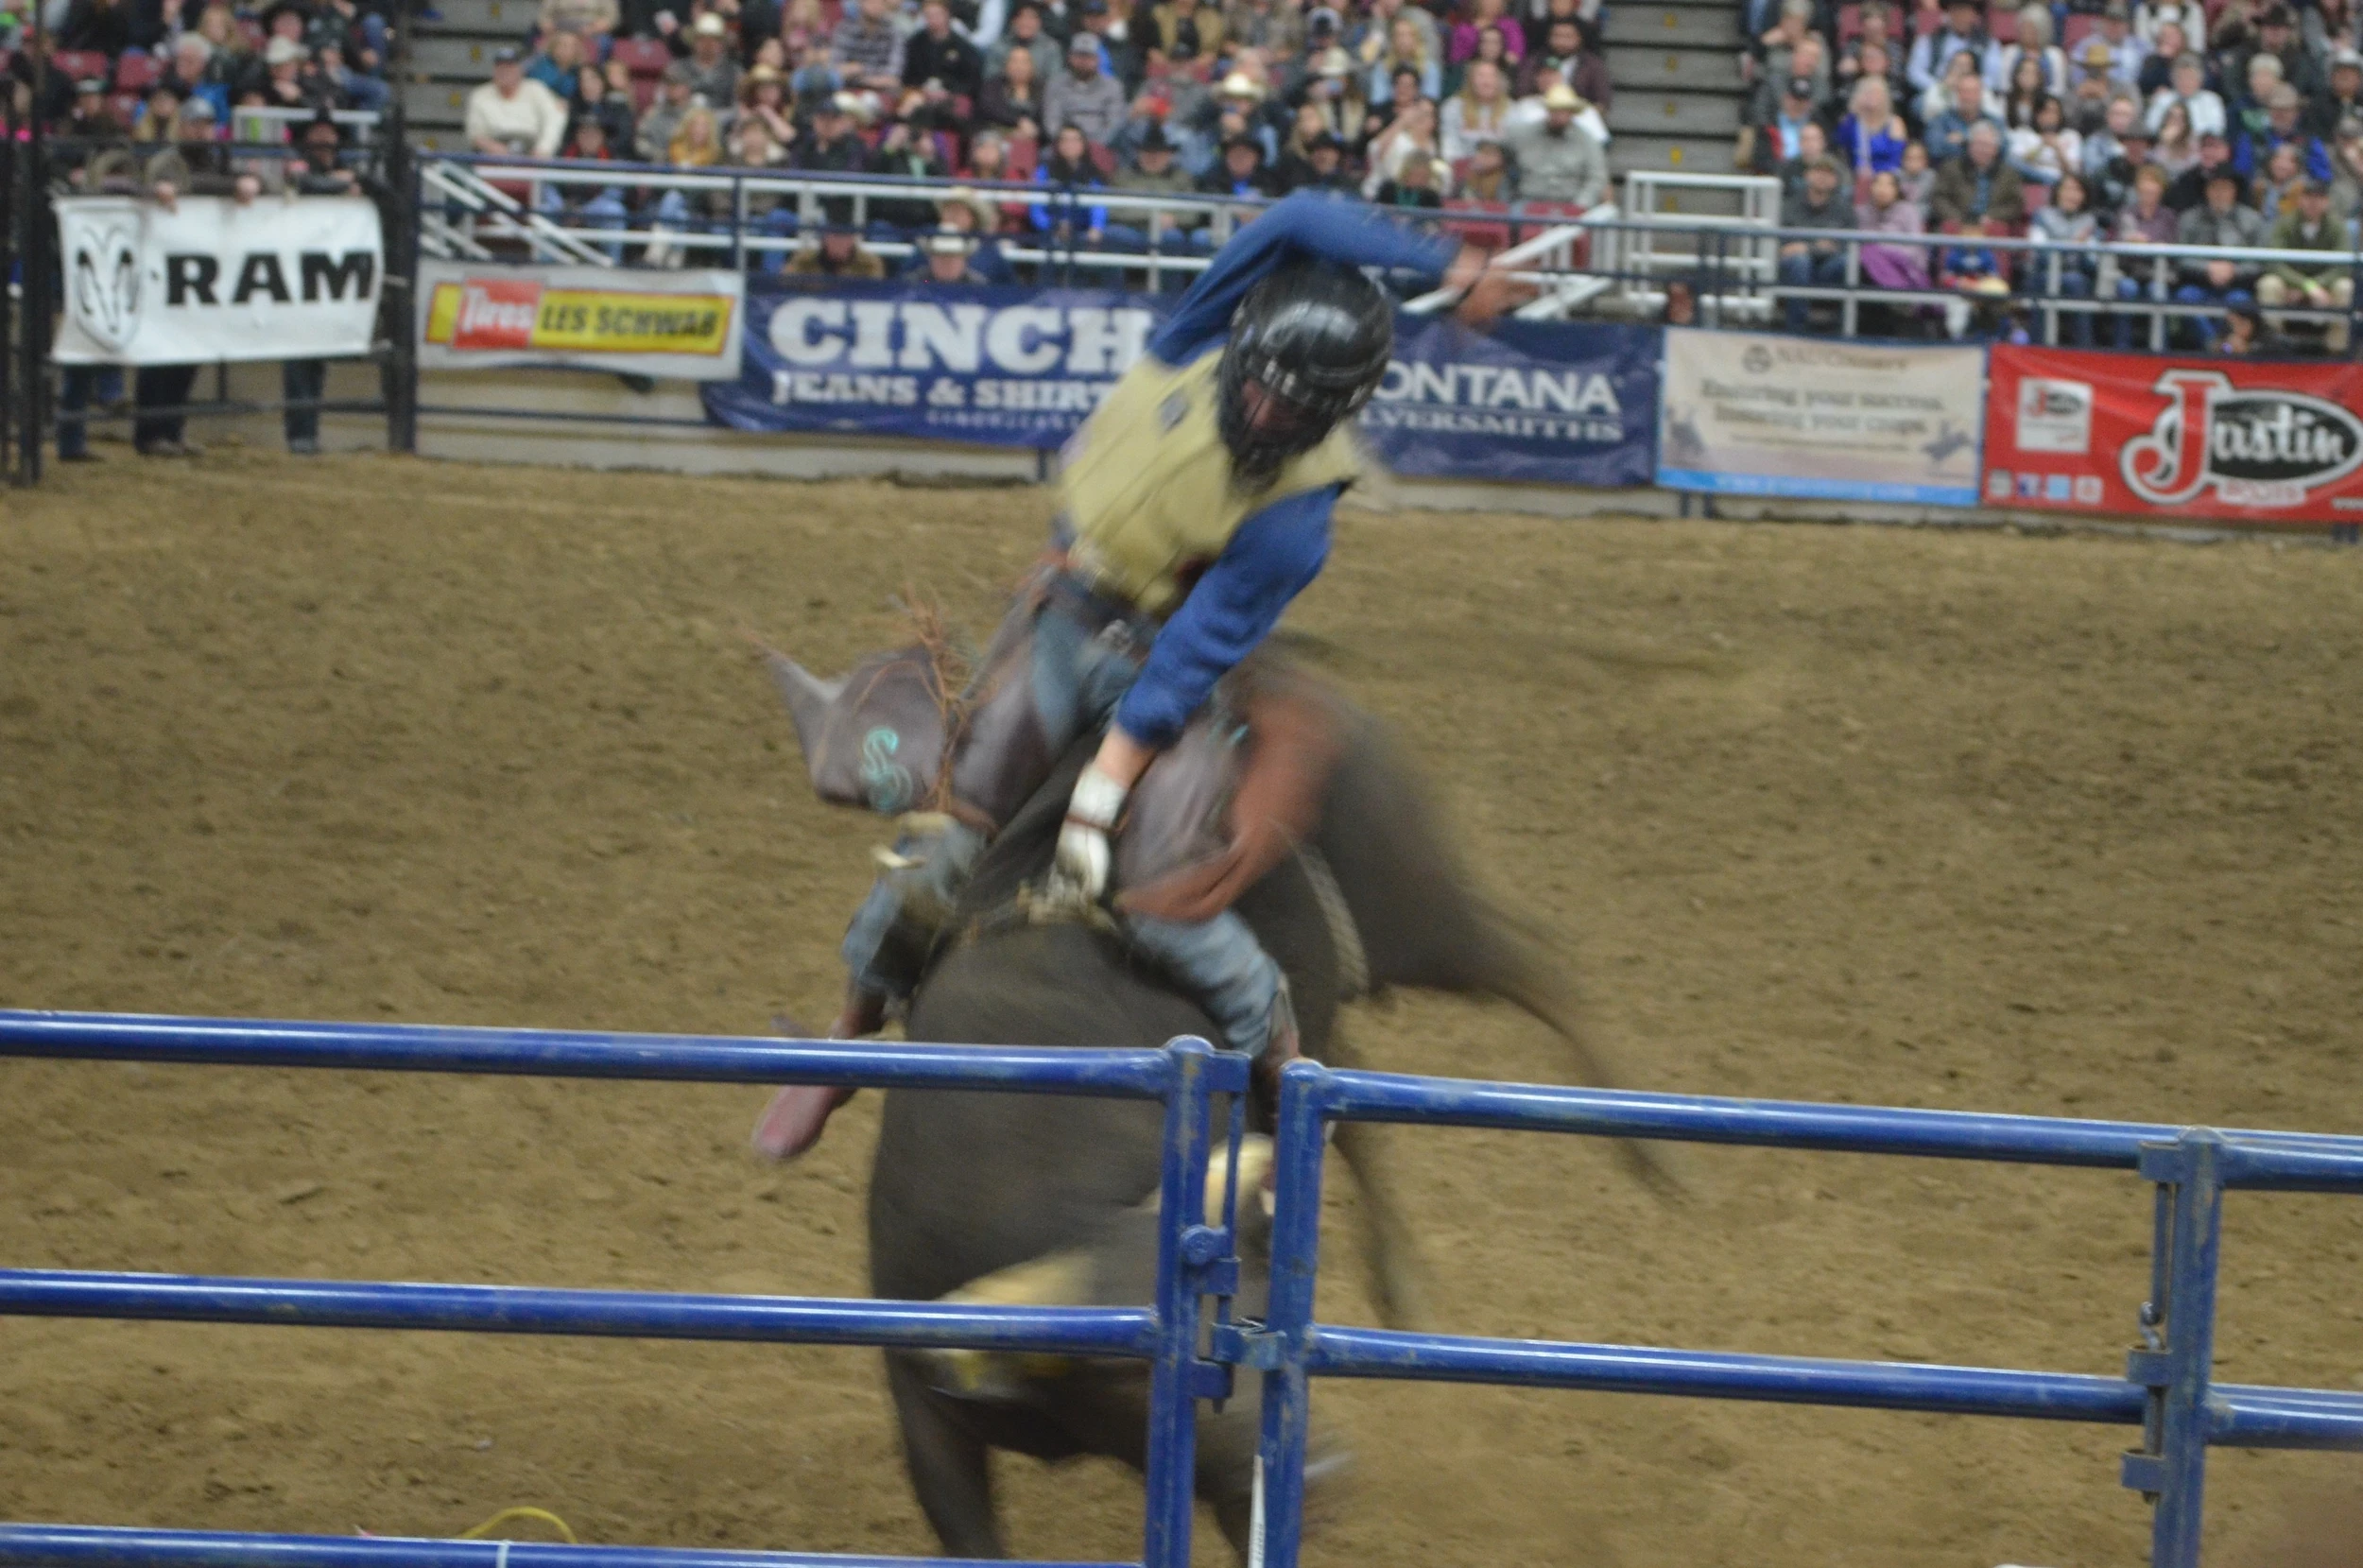 Bullfighters Only takes center stage at Ellensburg Rodeo Friday night, News